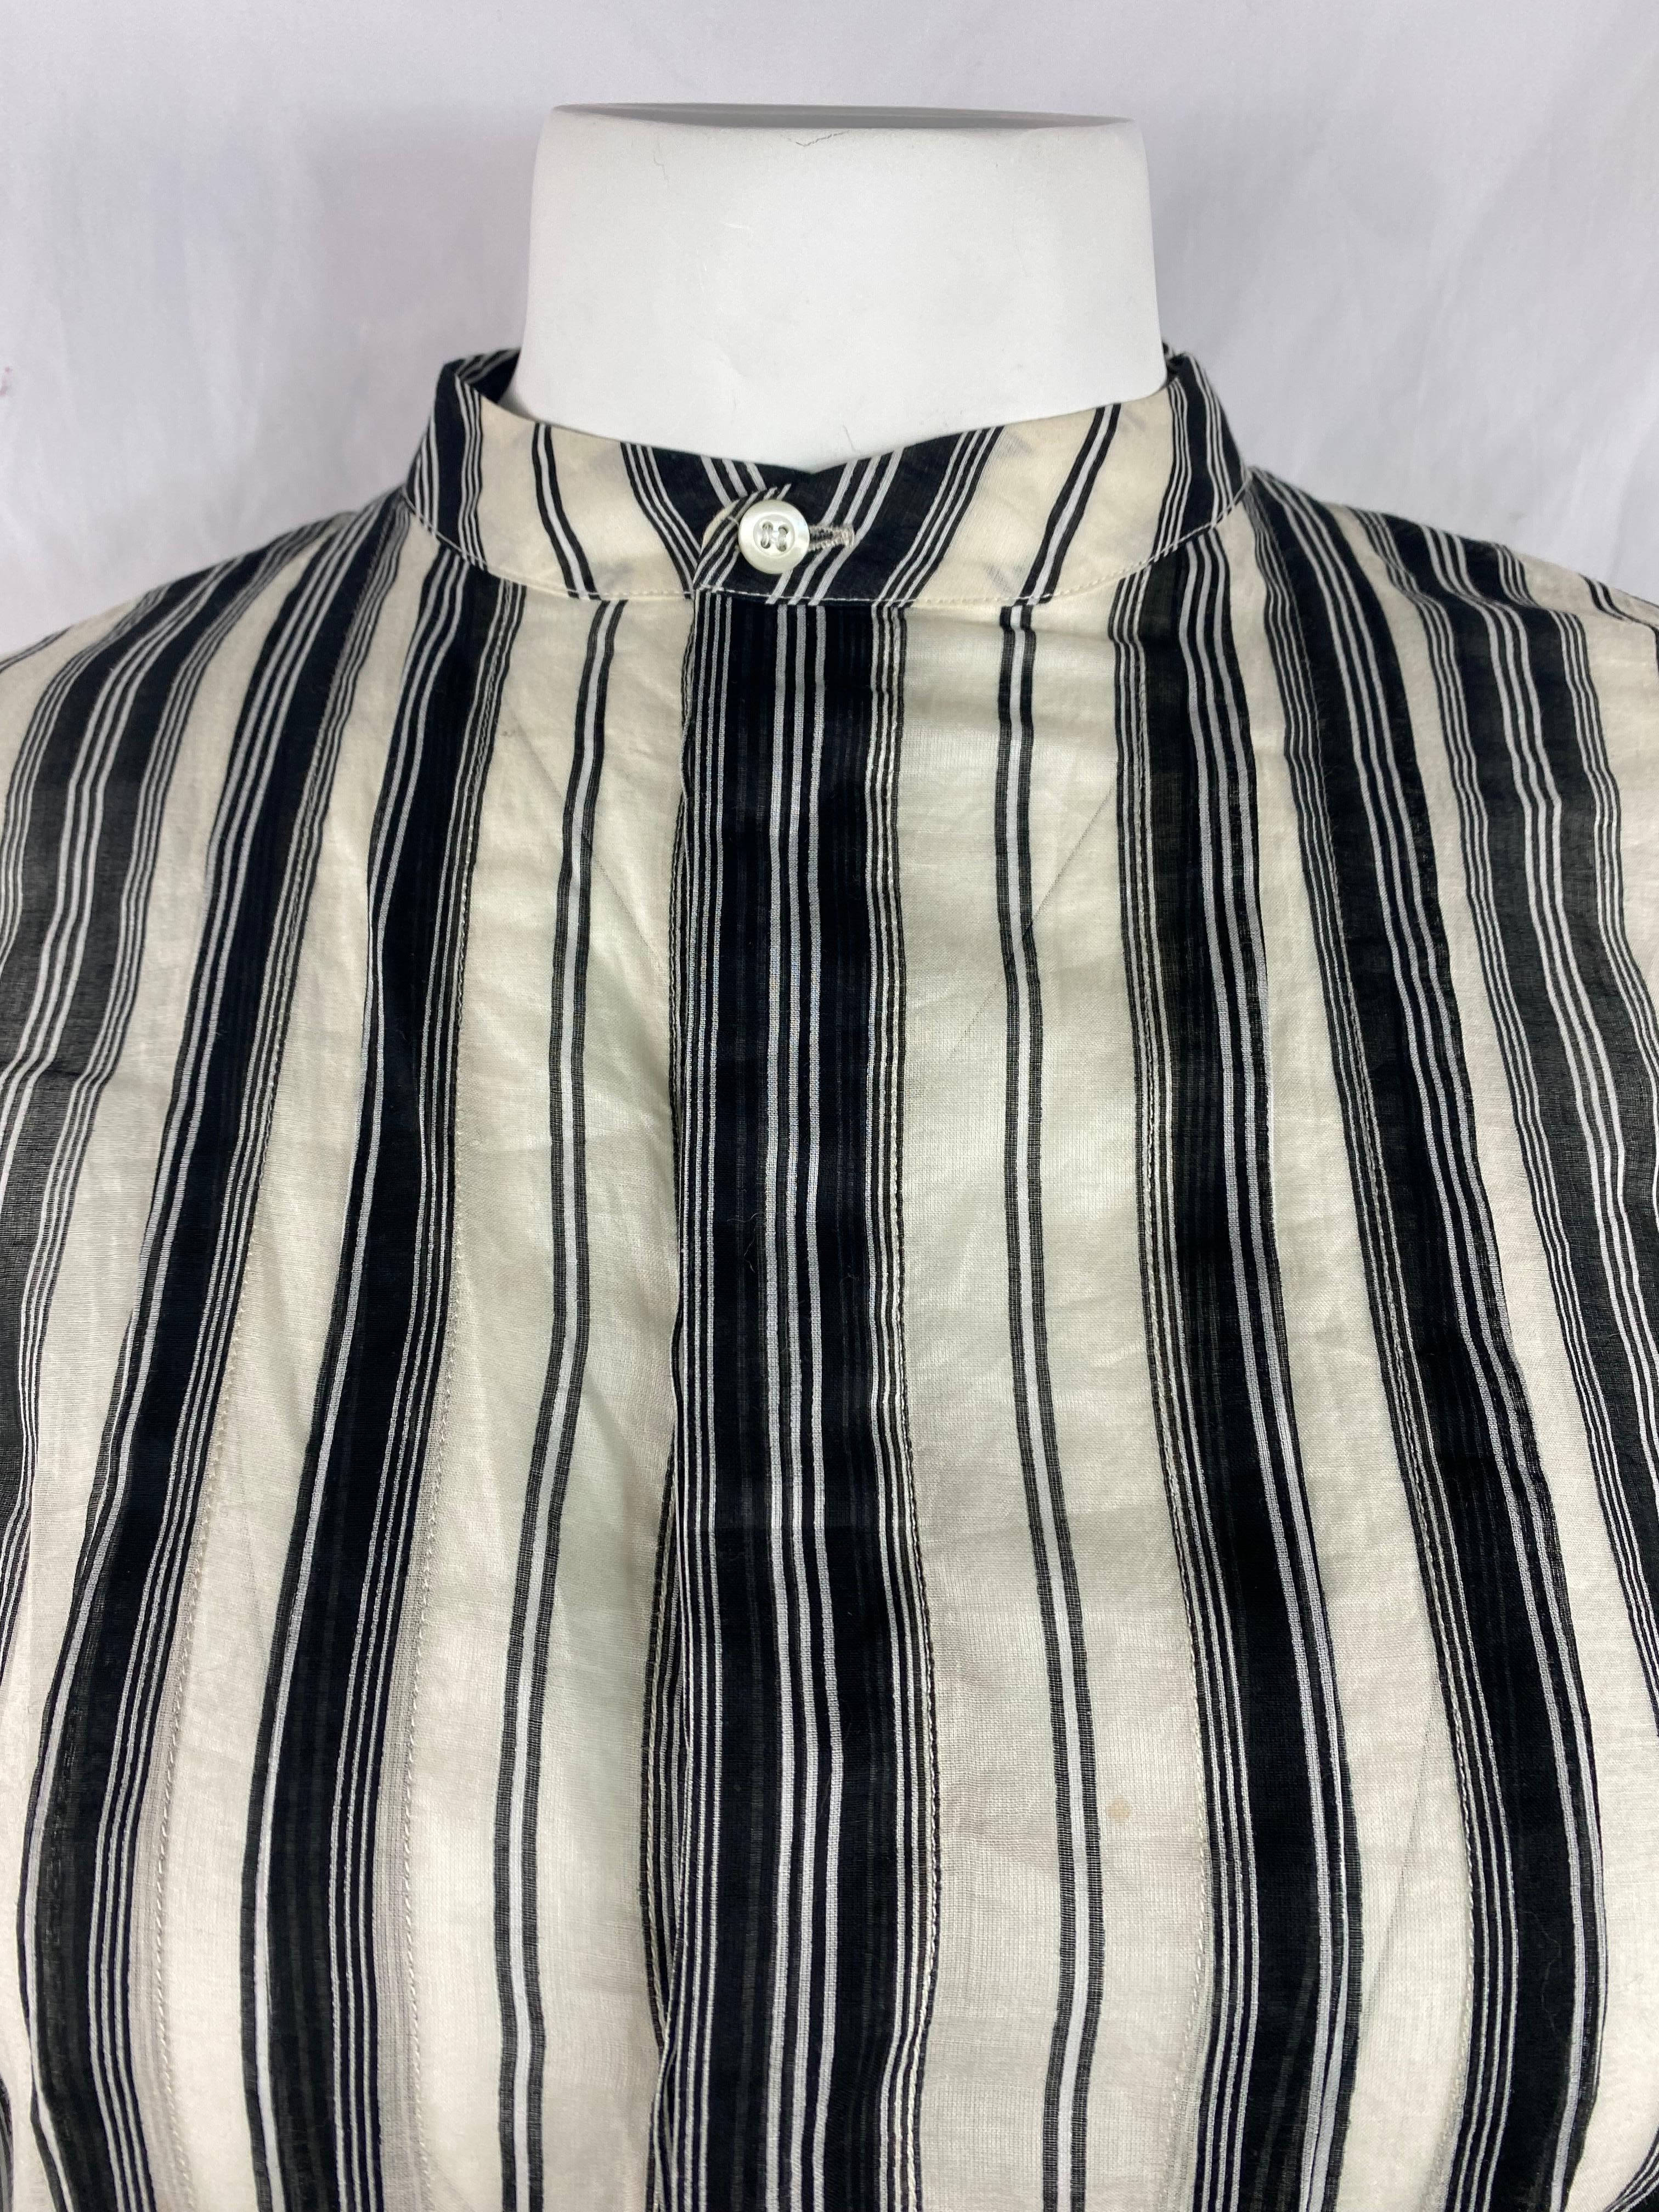 Product details:

The top is made out of 100% cotton, it features black and white striped print with front button half down closure.